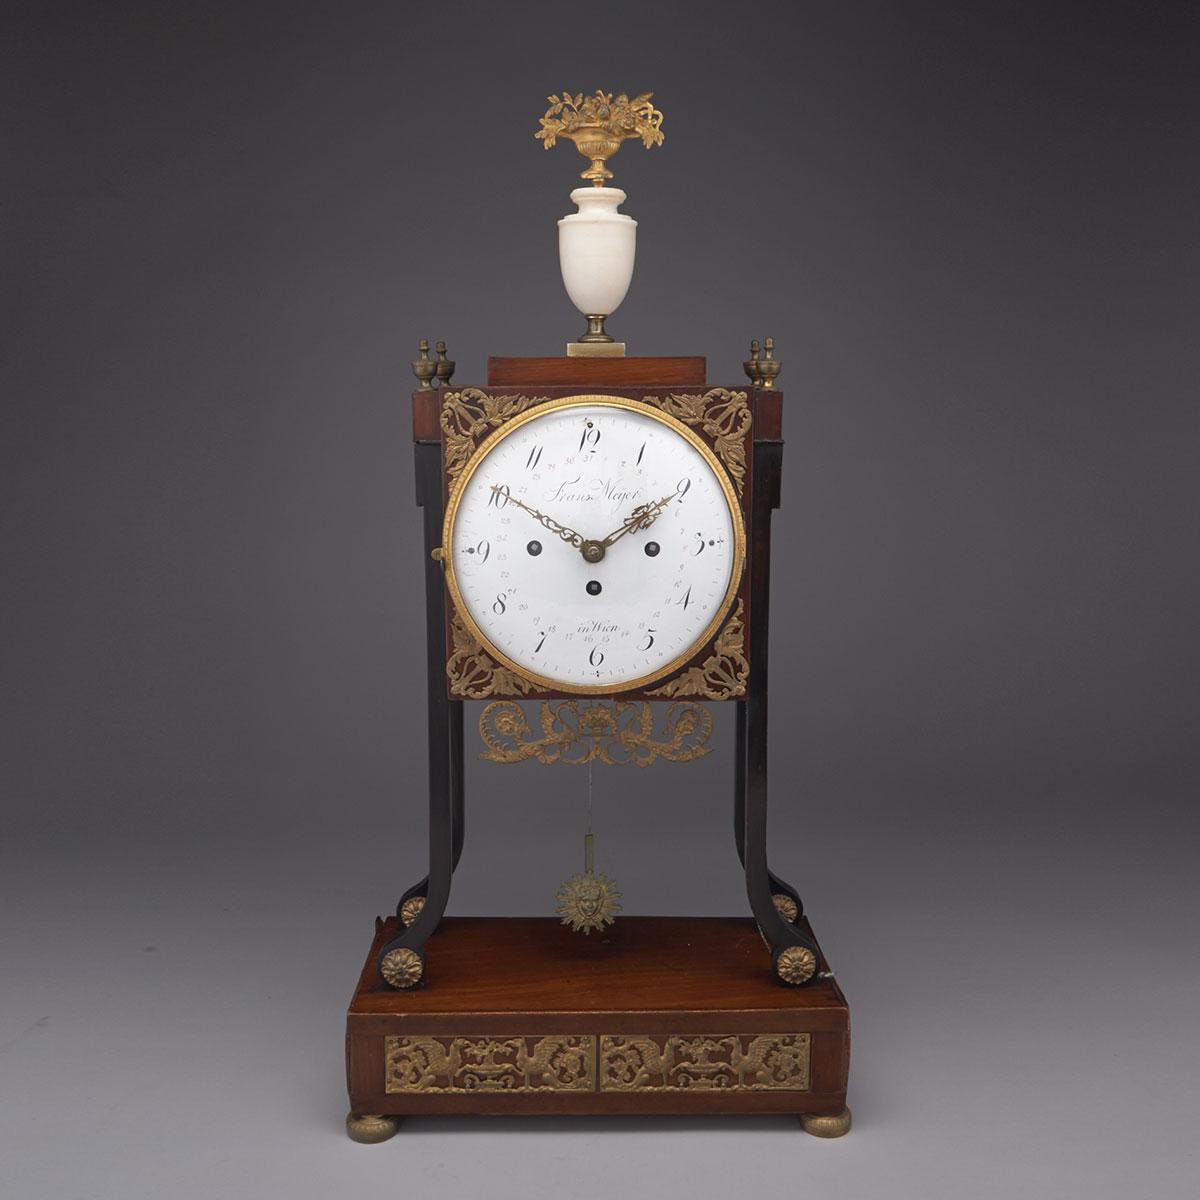 Viennese Grande Sonnerie Quarter Repeating Mantel Clock, early 19th century